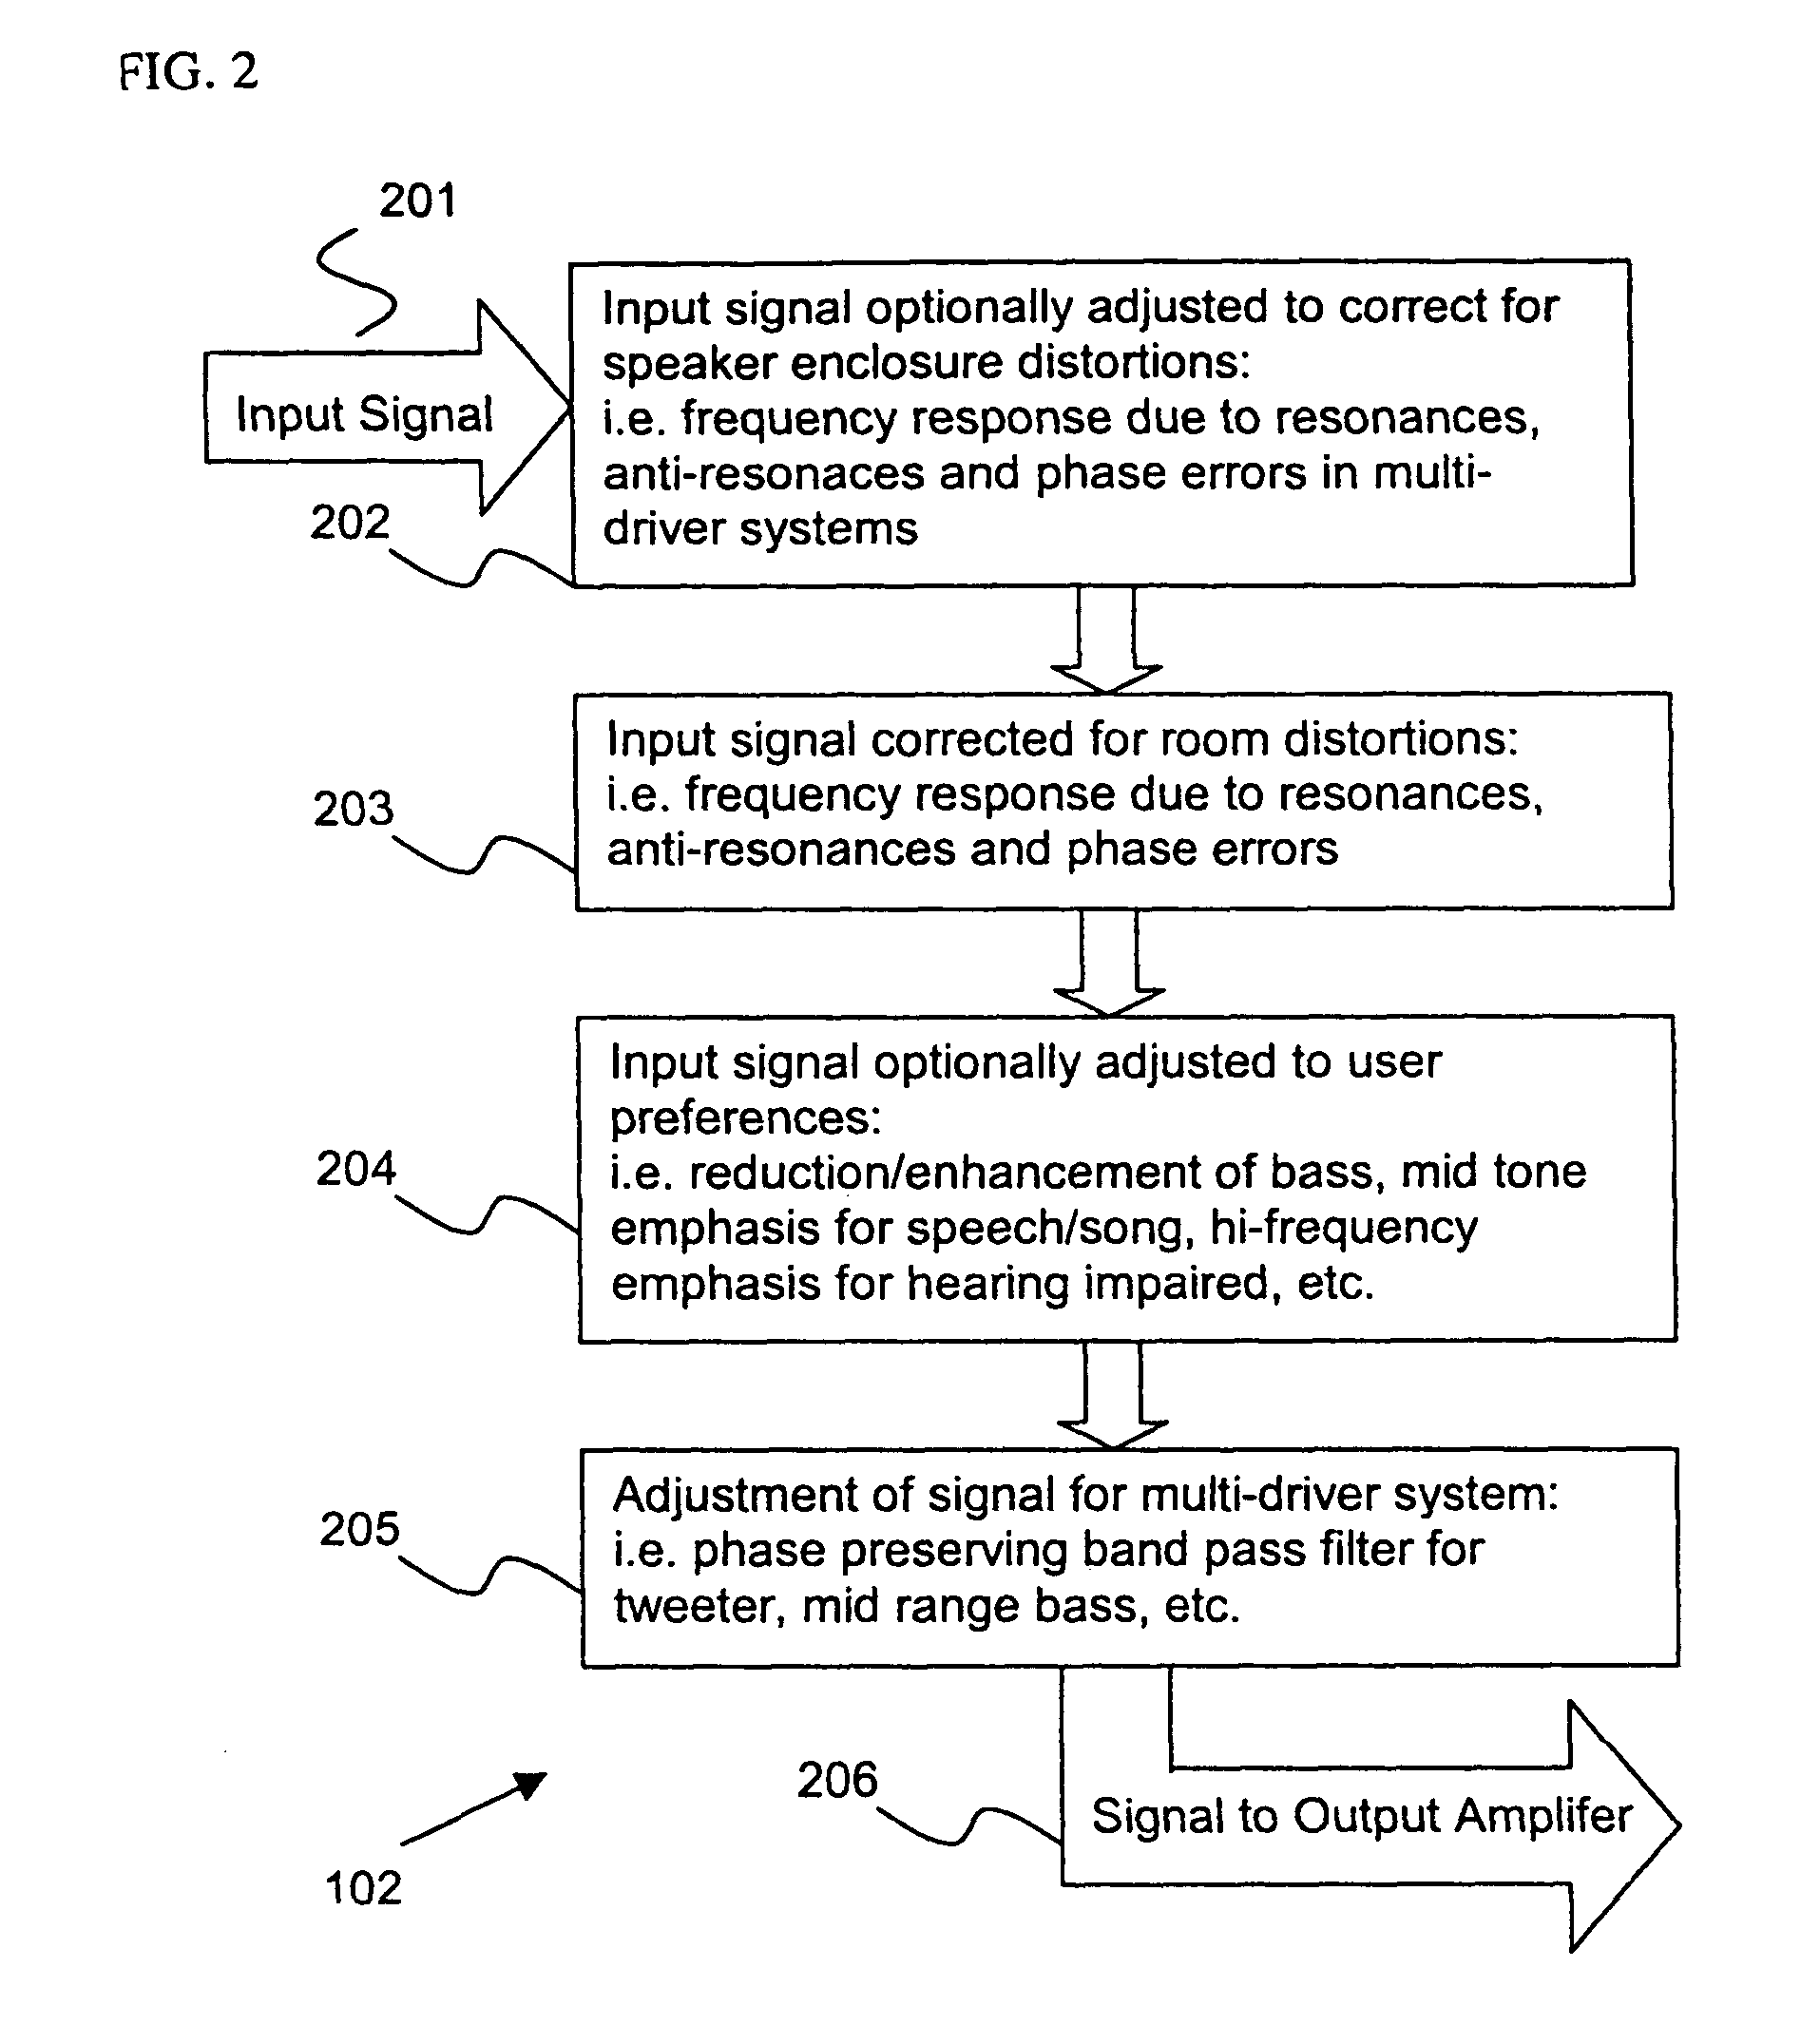 Method of measuring a cant of an actuator